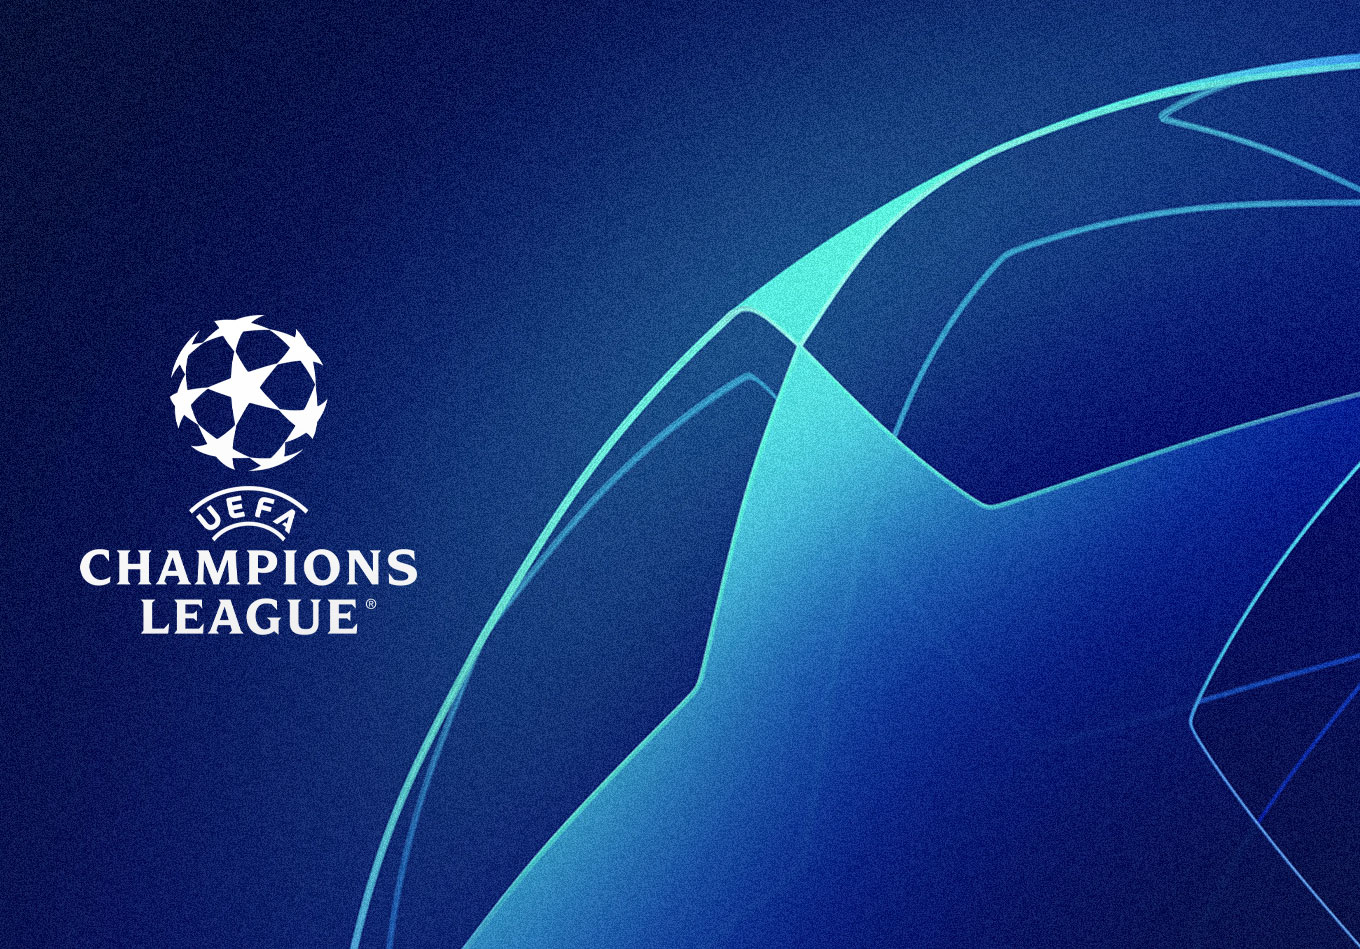 champions-league-preview-banner.jpg